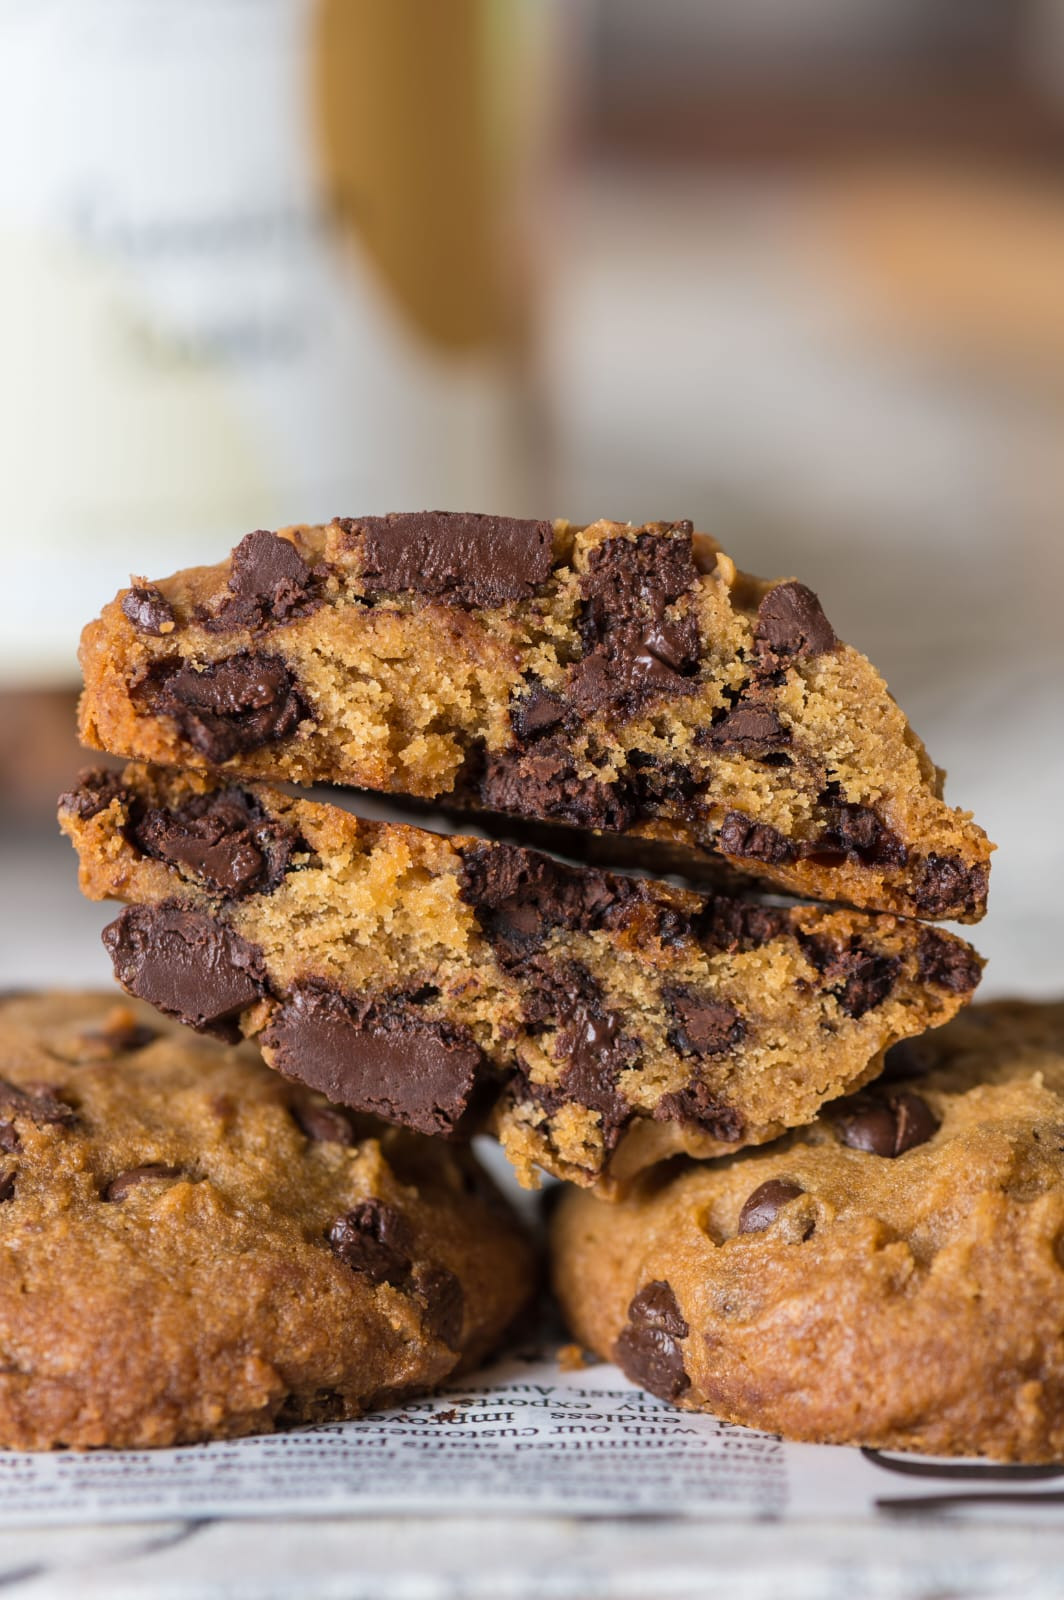 Classic Chocochips Cookies